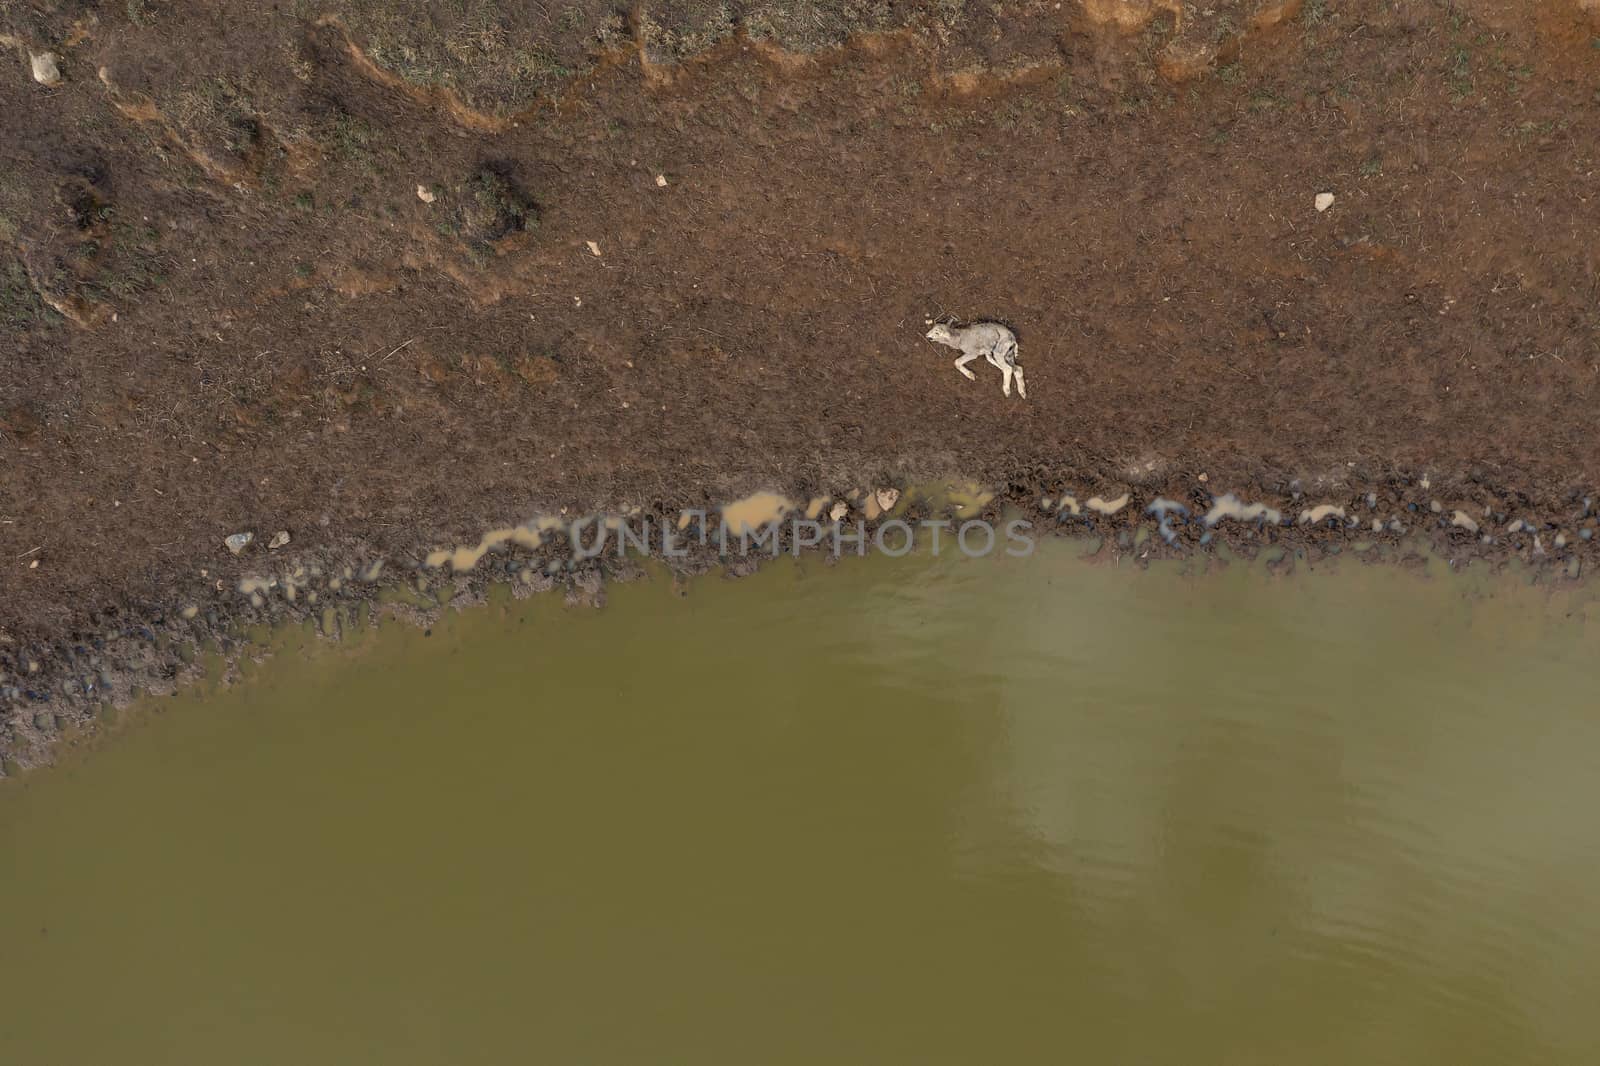 A dead lamb lying next a dry agricultural irrigation dam in regional Australia by WittkePhotos